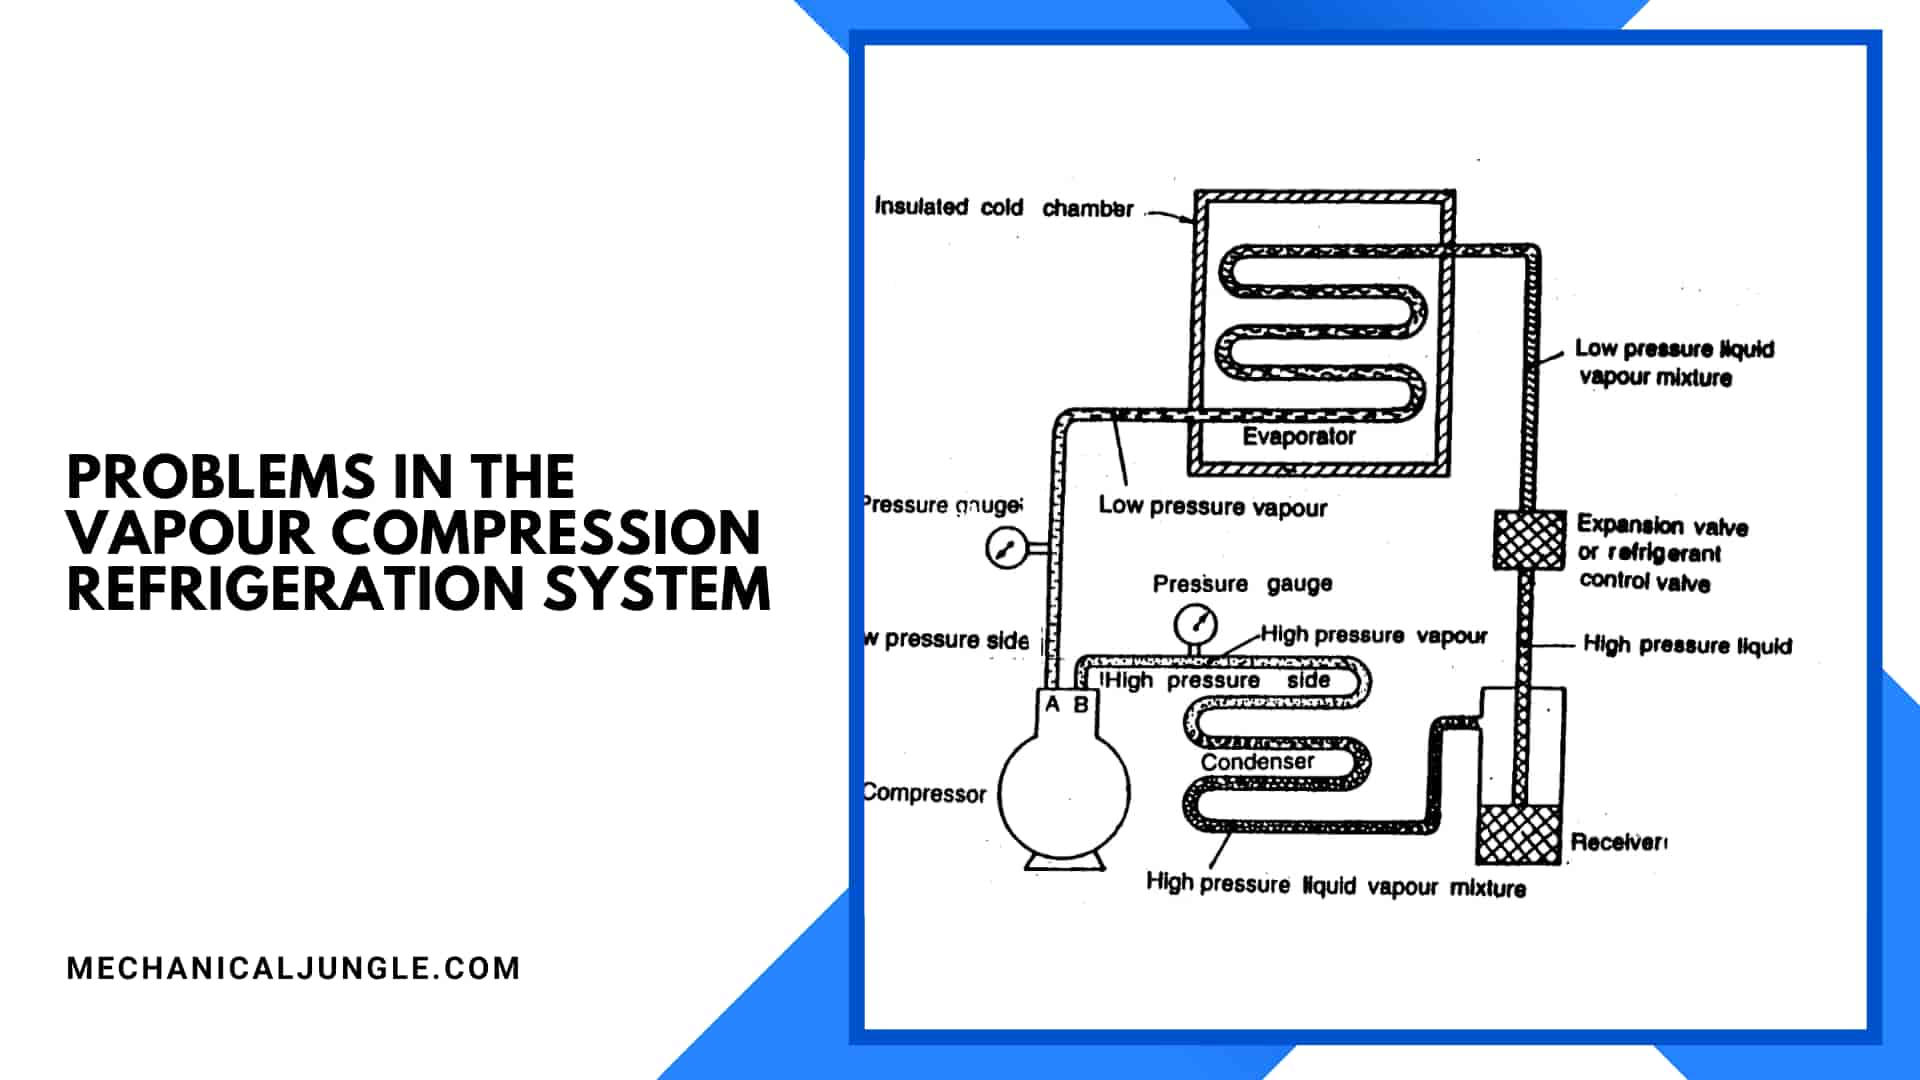 Problems in the Vapour Compression Refrigeration System